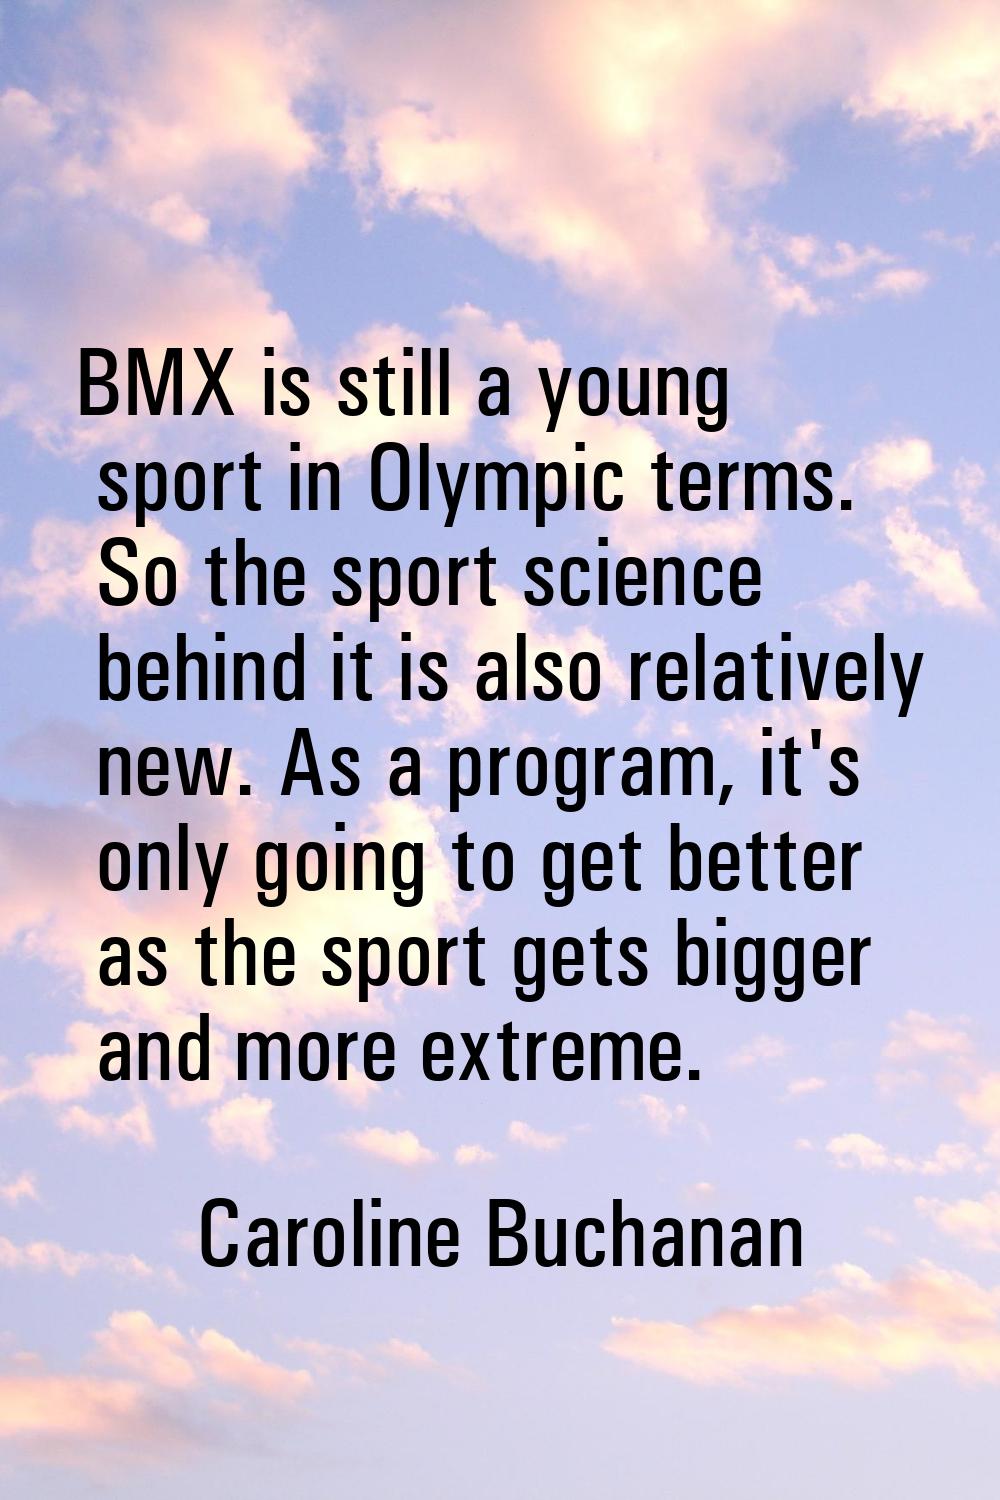 BMX is still a young sport in Olympic terms. So the sport science behind it is also relatively new.